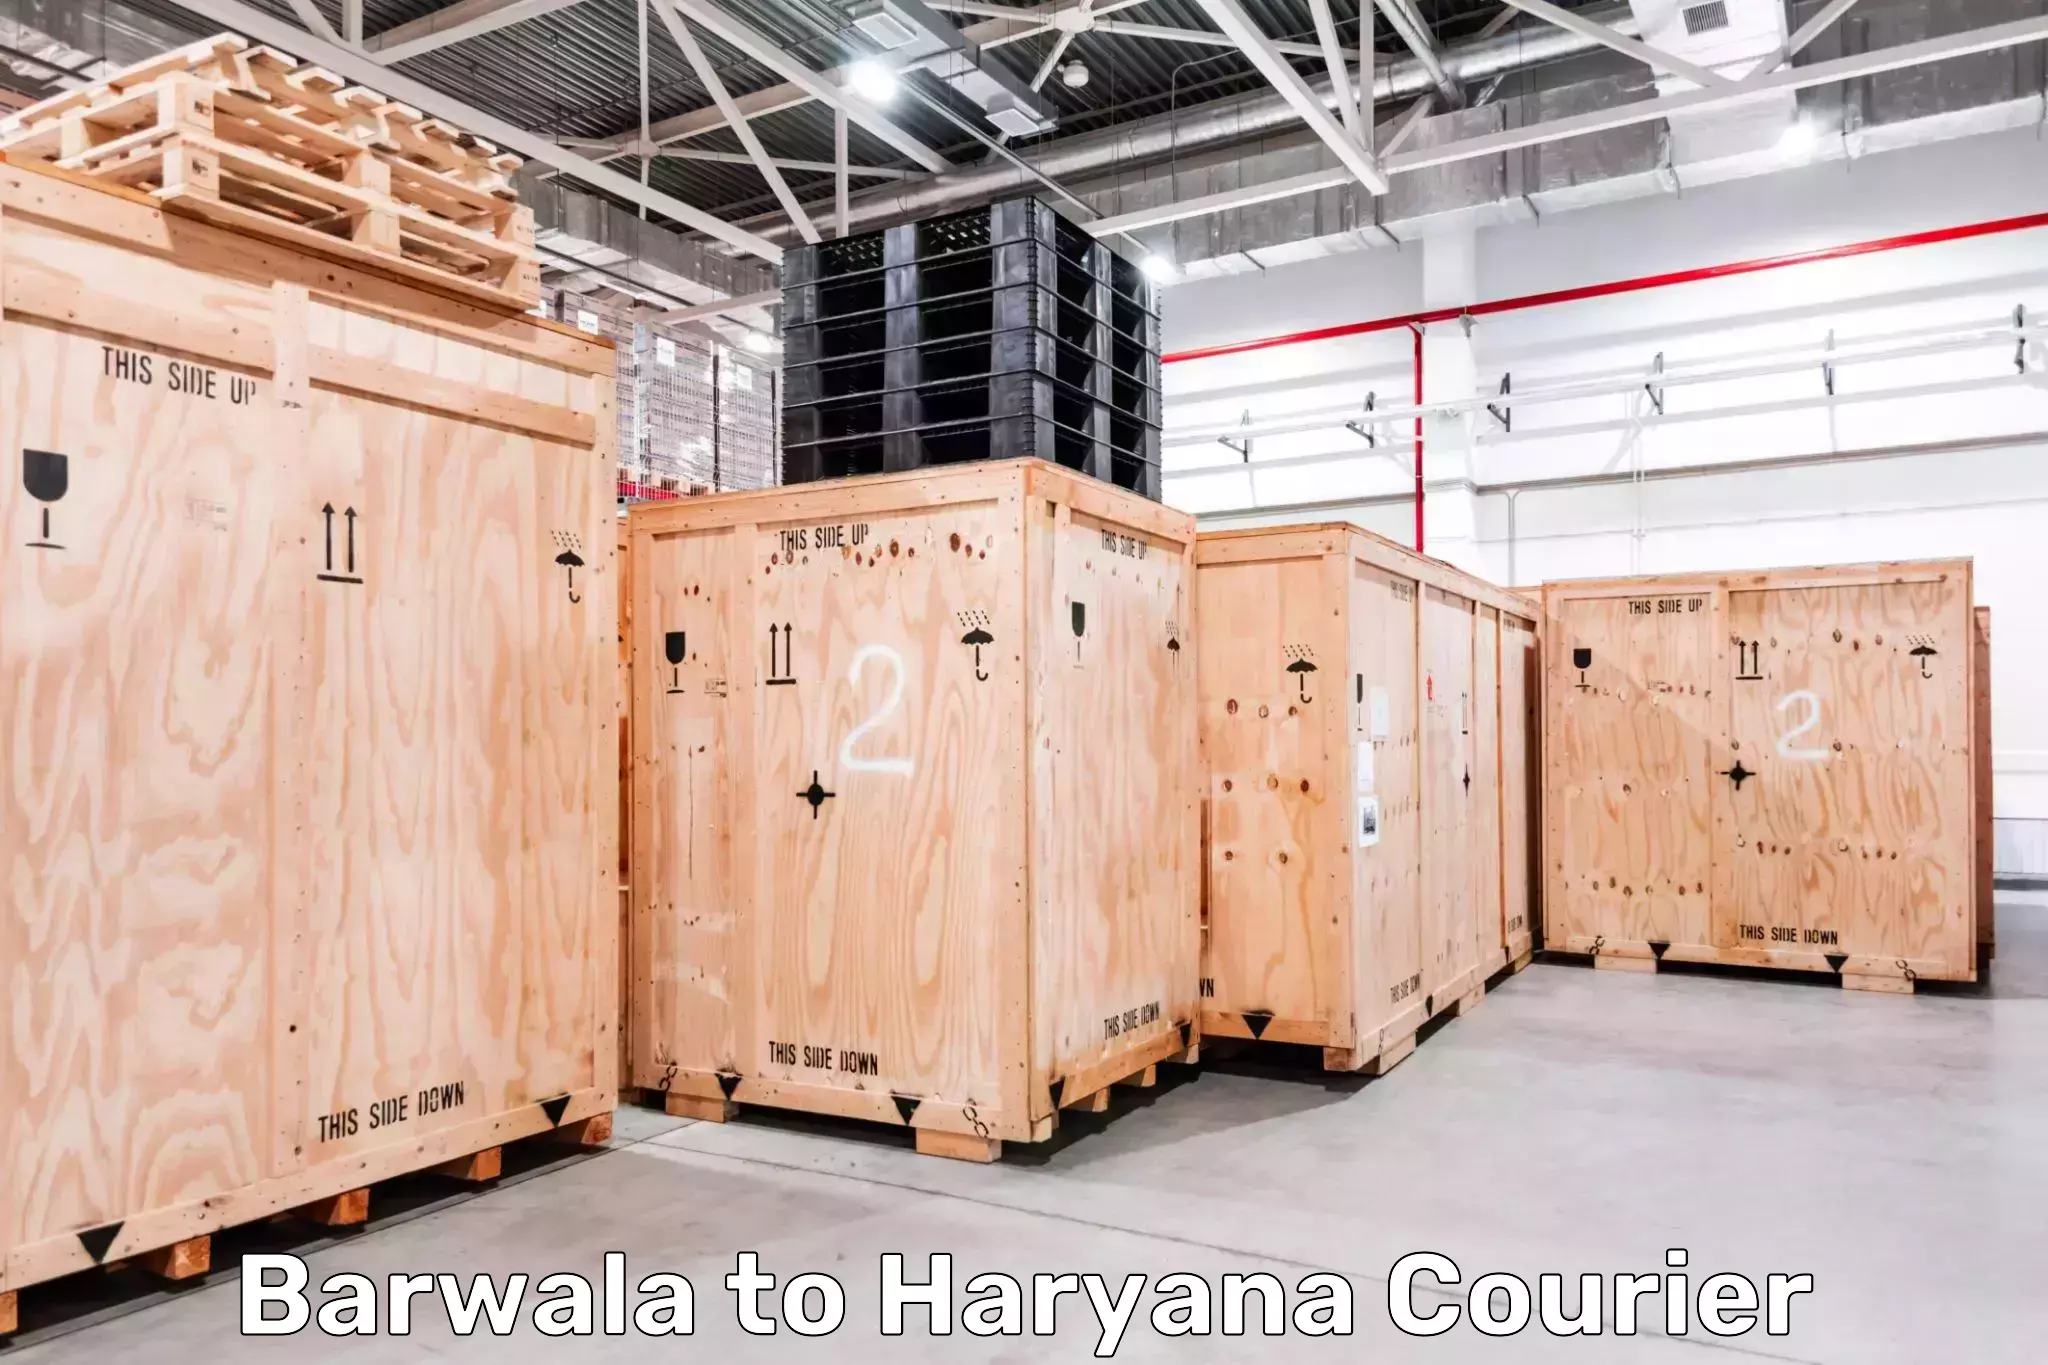 Package delivery network Barwala to Haryana